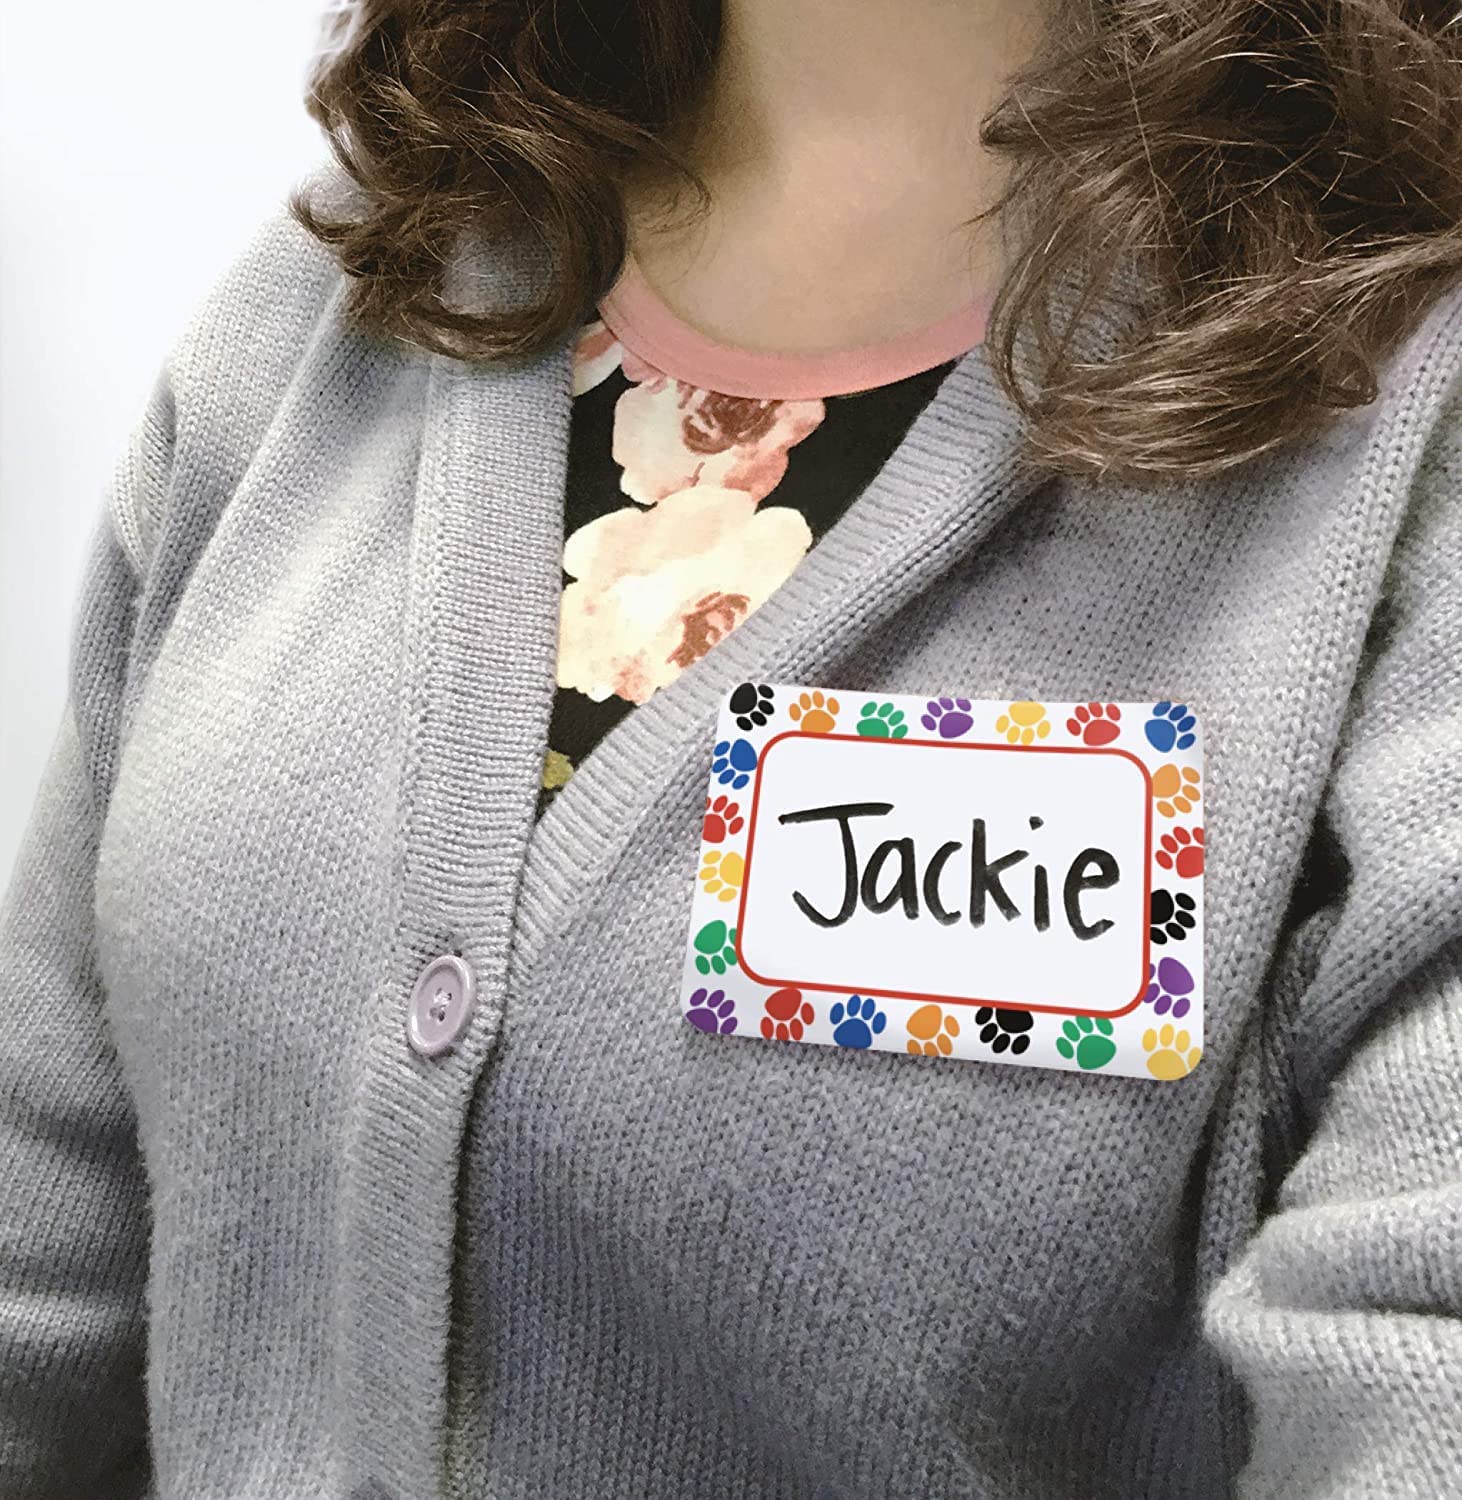 Name Tag Sticker with colorful paw print